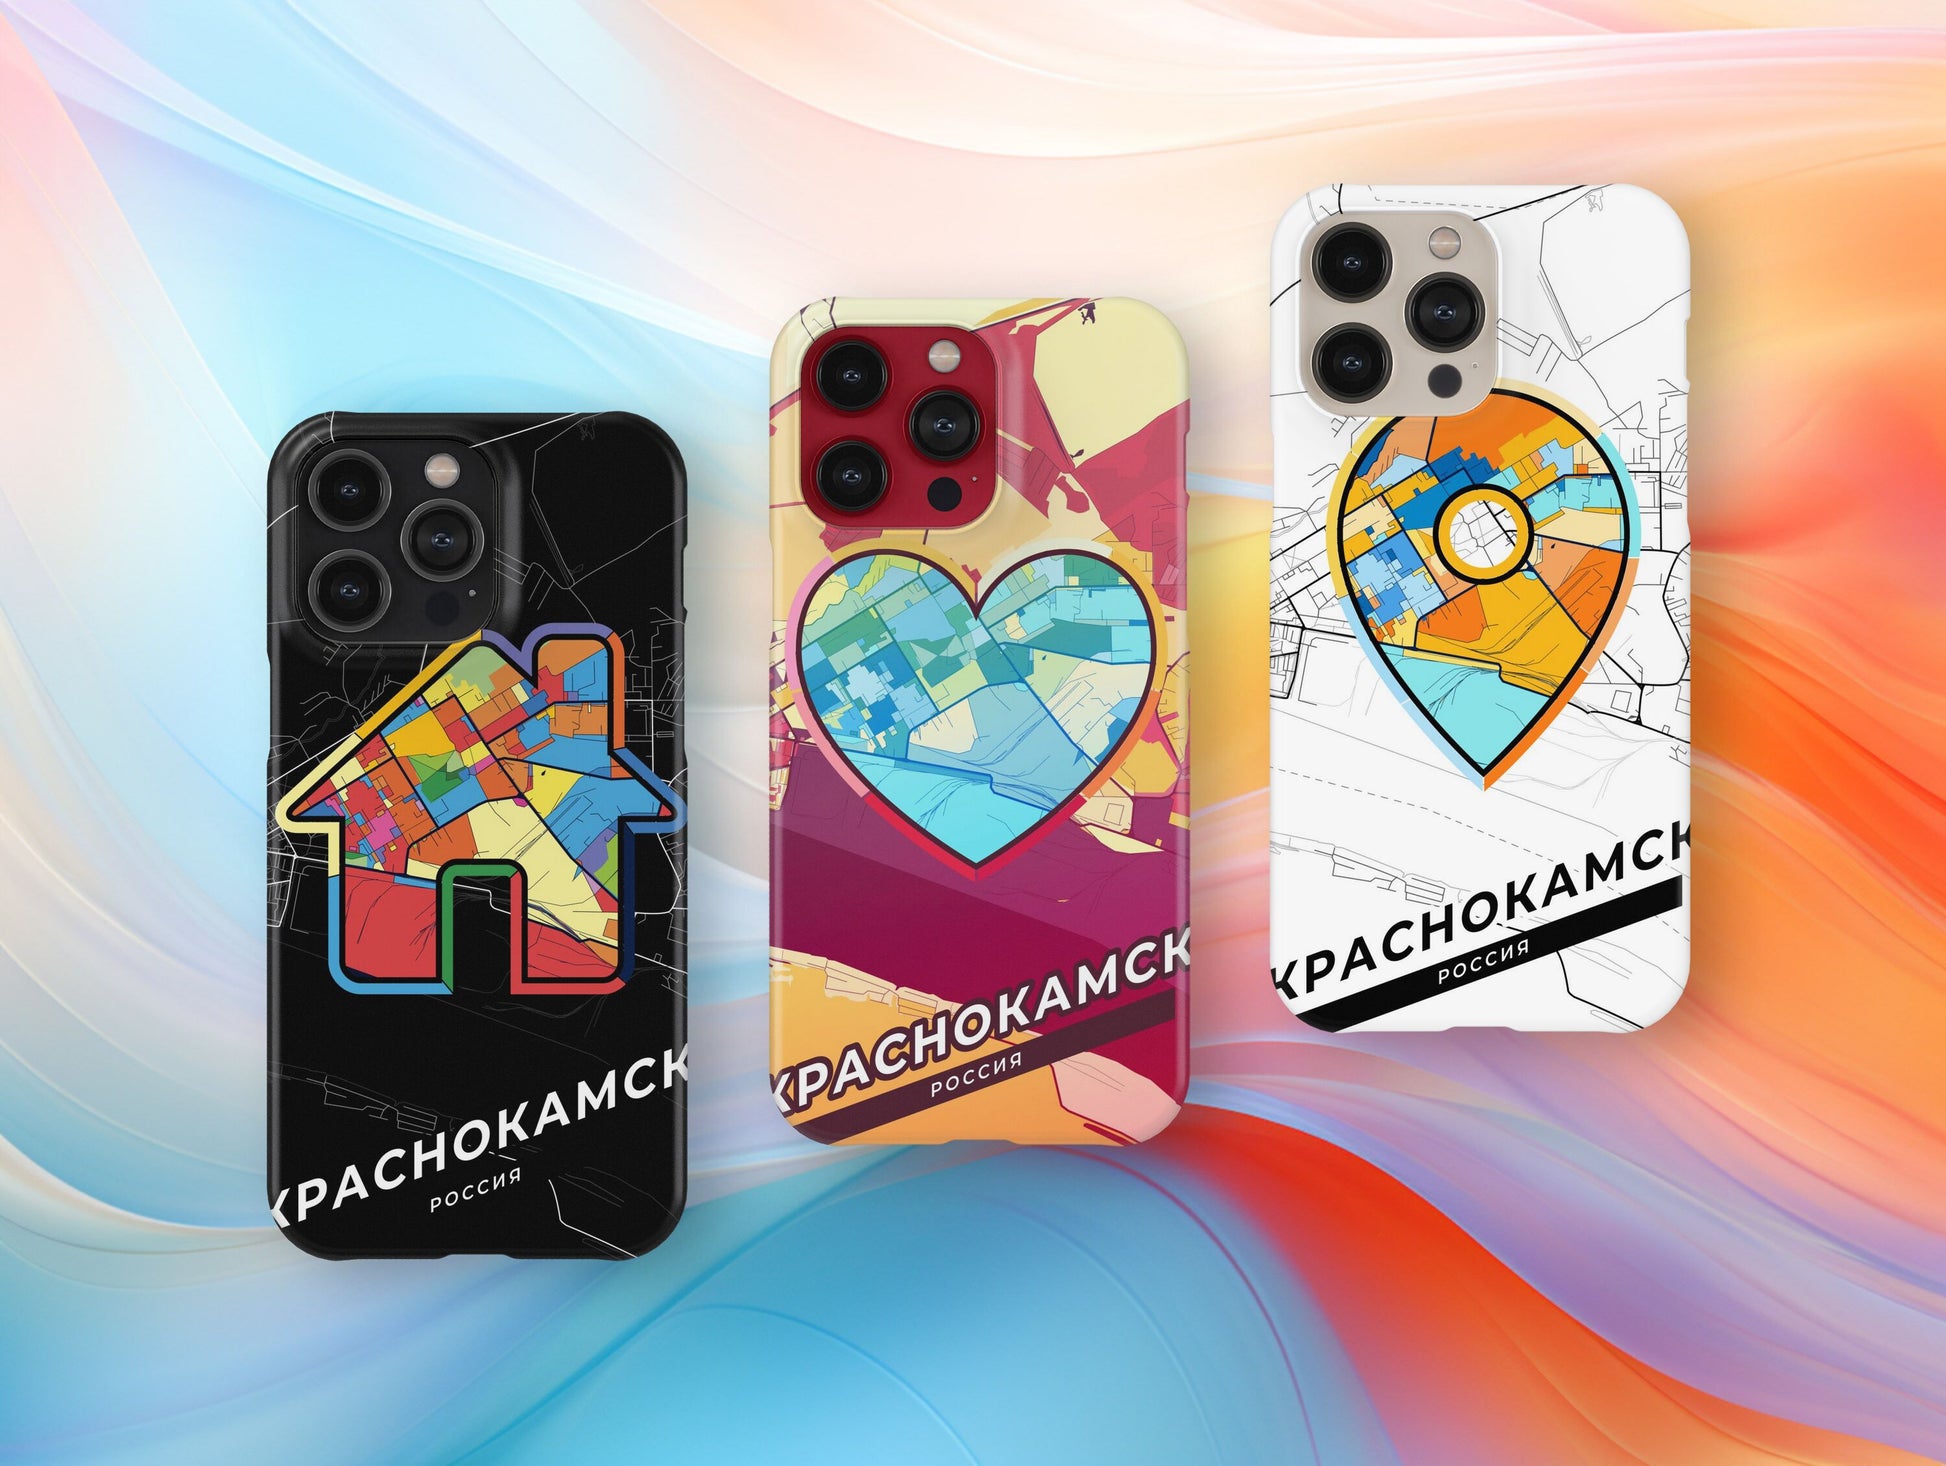 Krasnokamsk Russia slim phone case with colorful icon. Birthday, wedding or housewarming gift. Couple match cases.